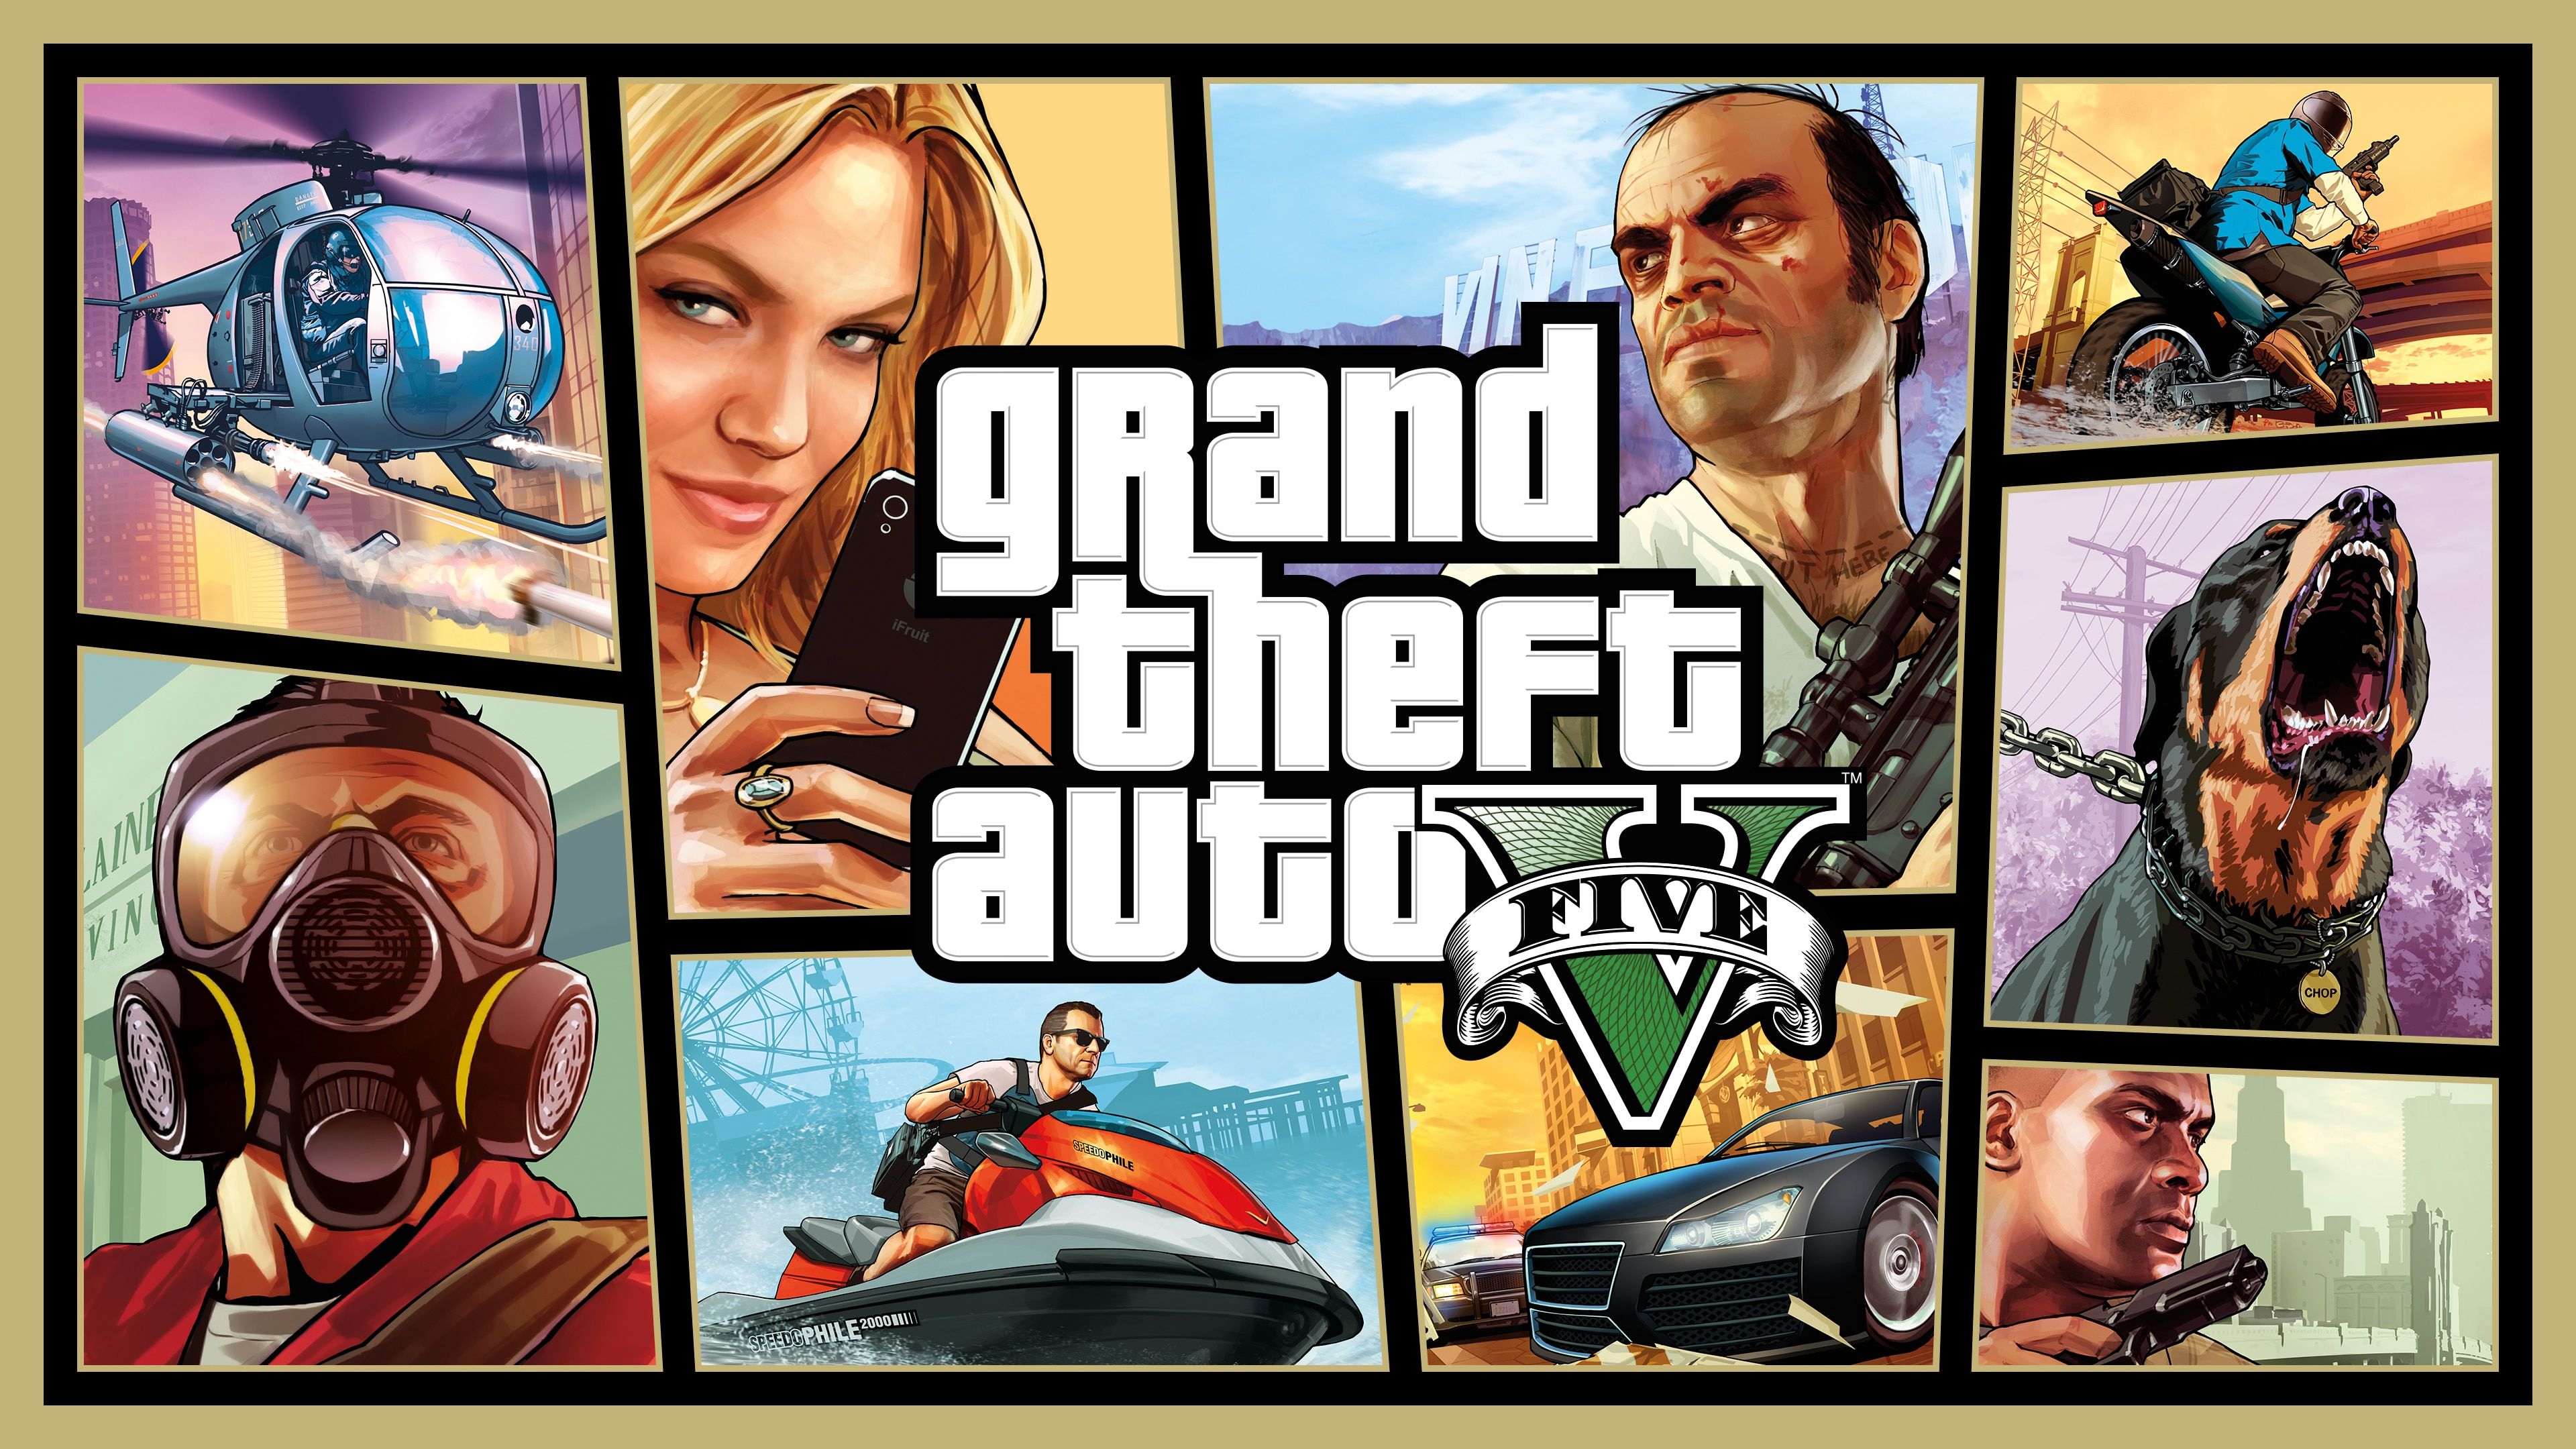 A Cover Image Of The Grand Theft Auto V